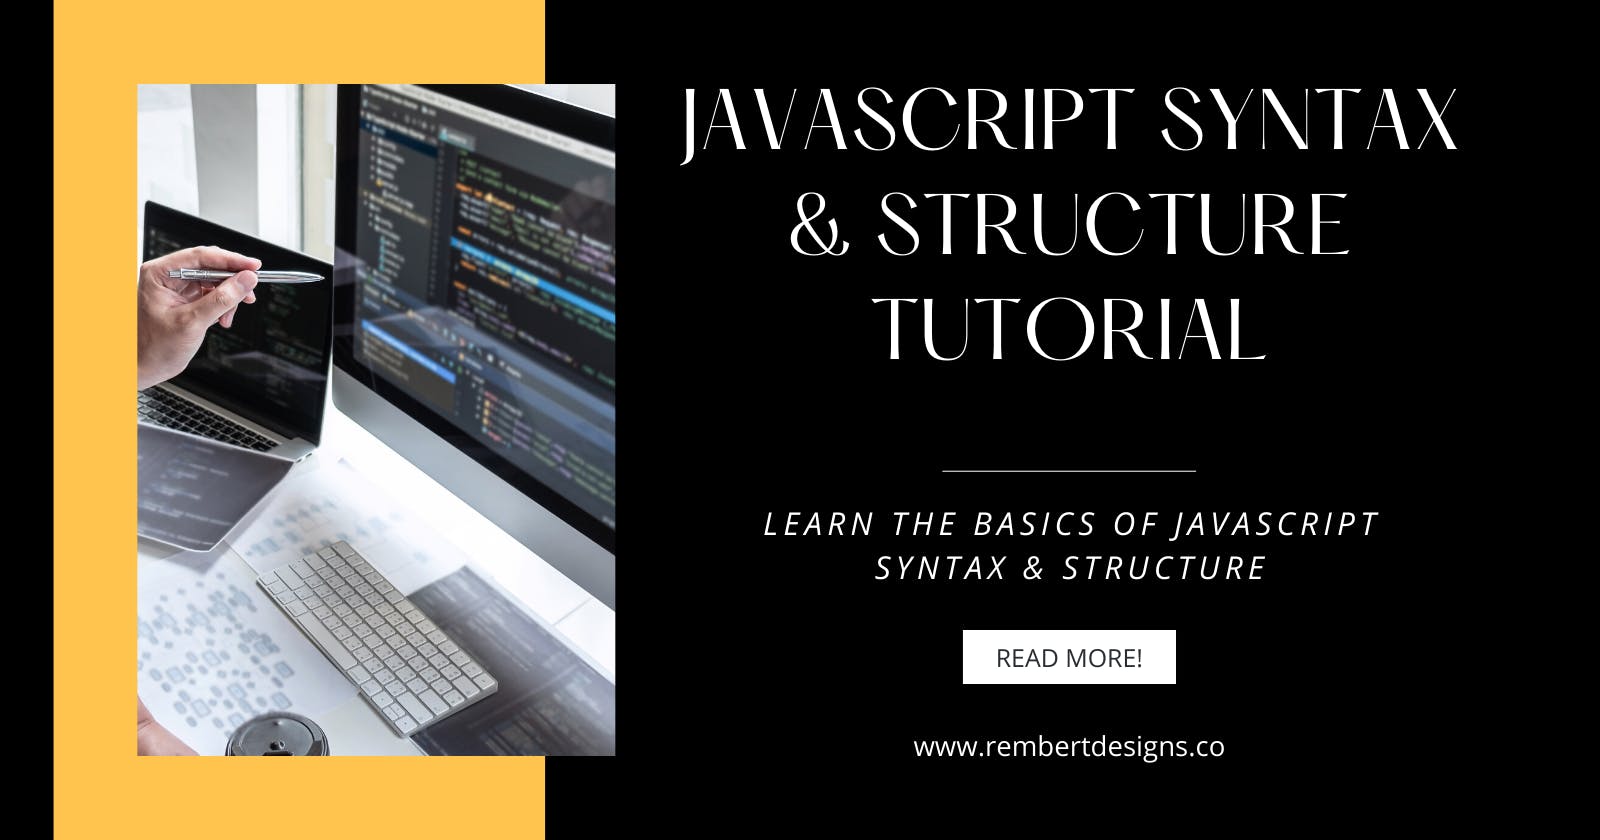 JavaScript Syntax & Structure Tutorial